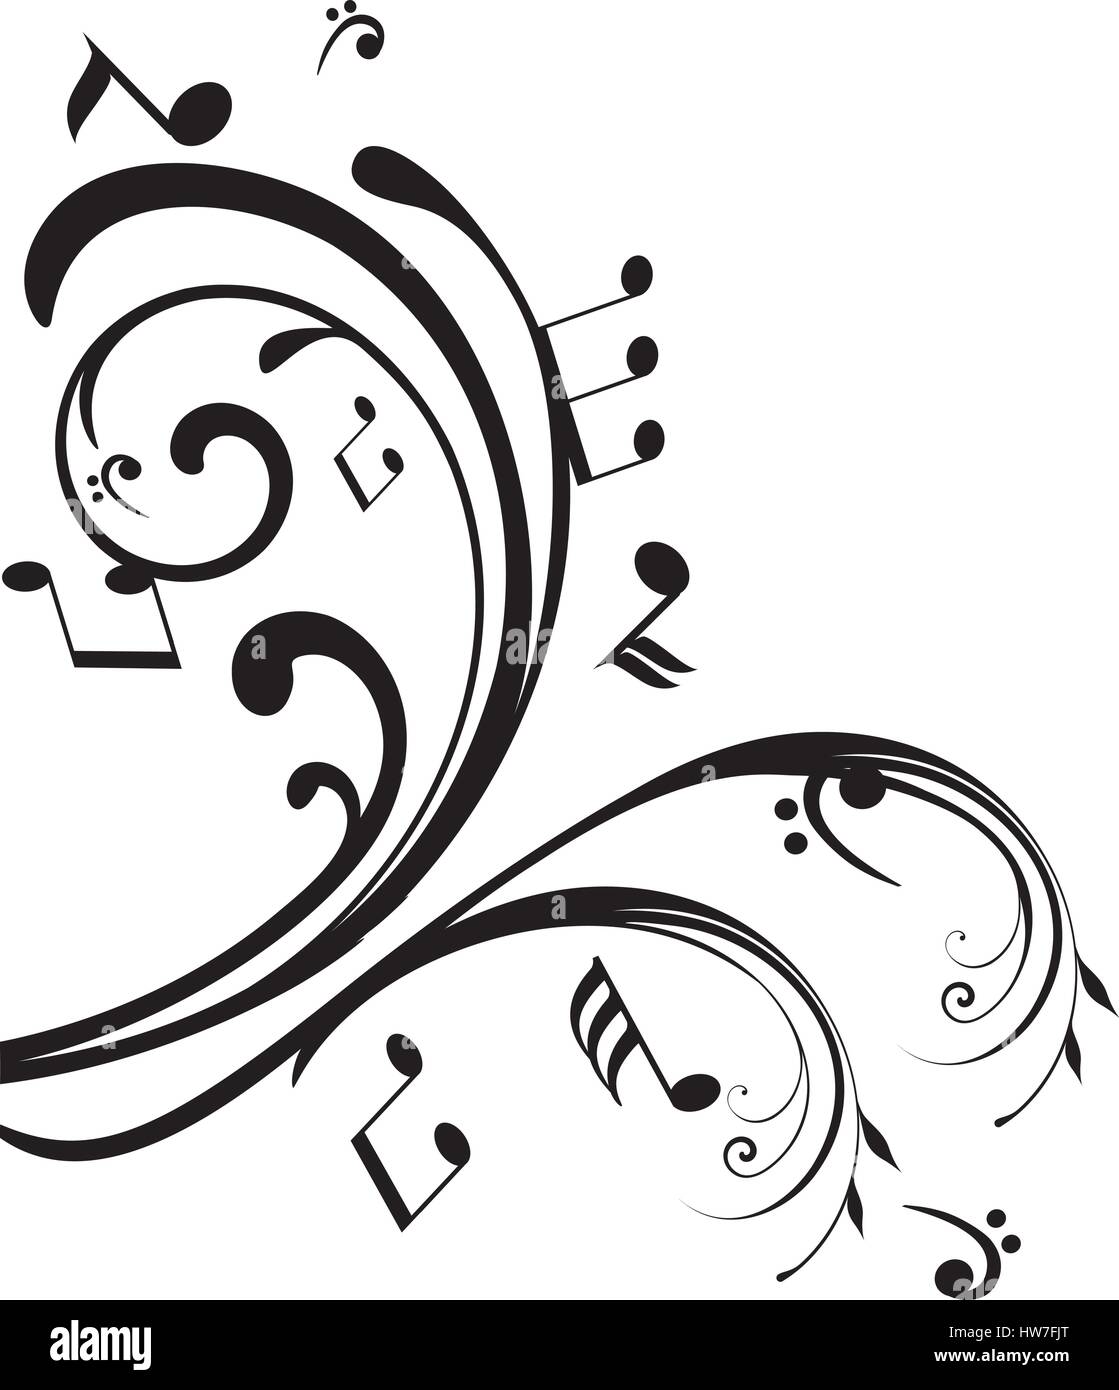 vector illustration of swirls with musical notes Stock Vector